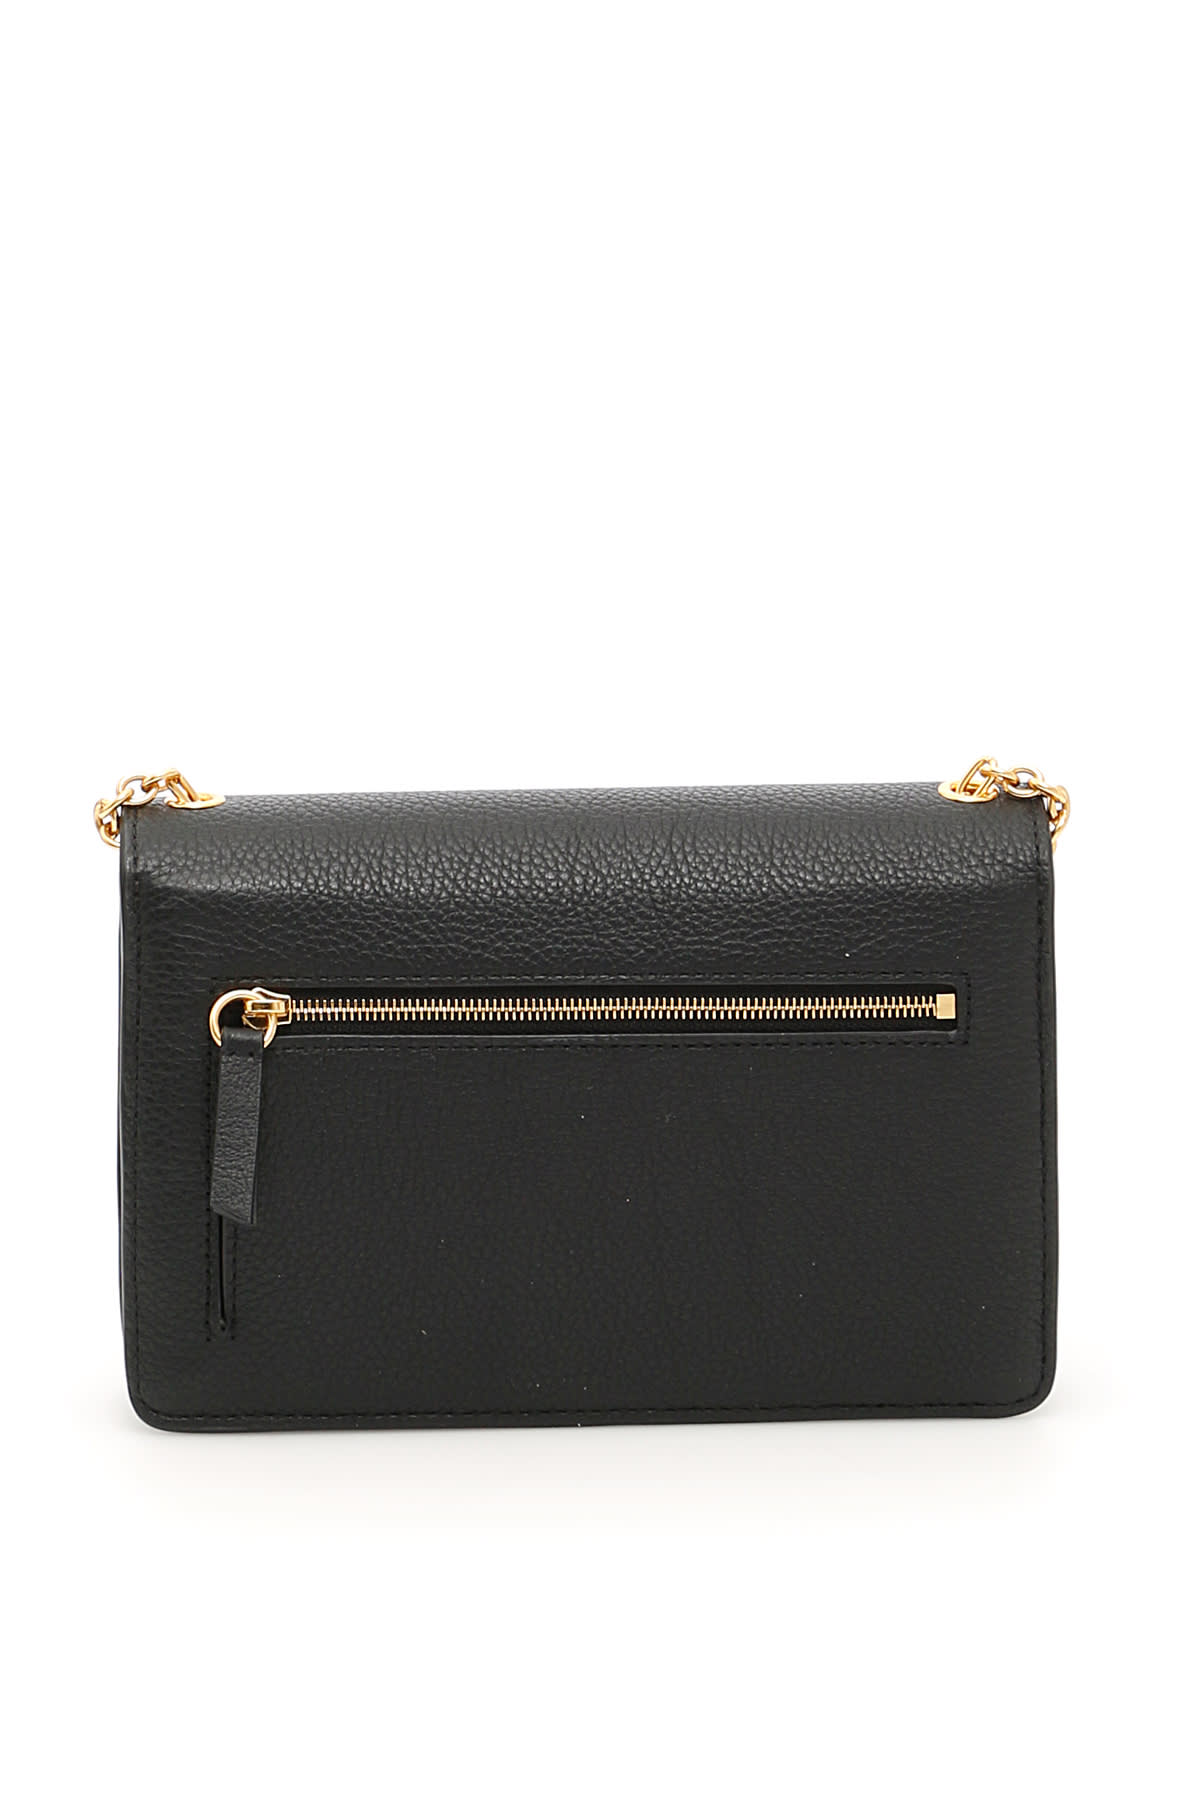 Shop Mulberry Small Darley Bag